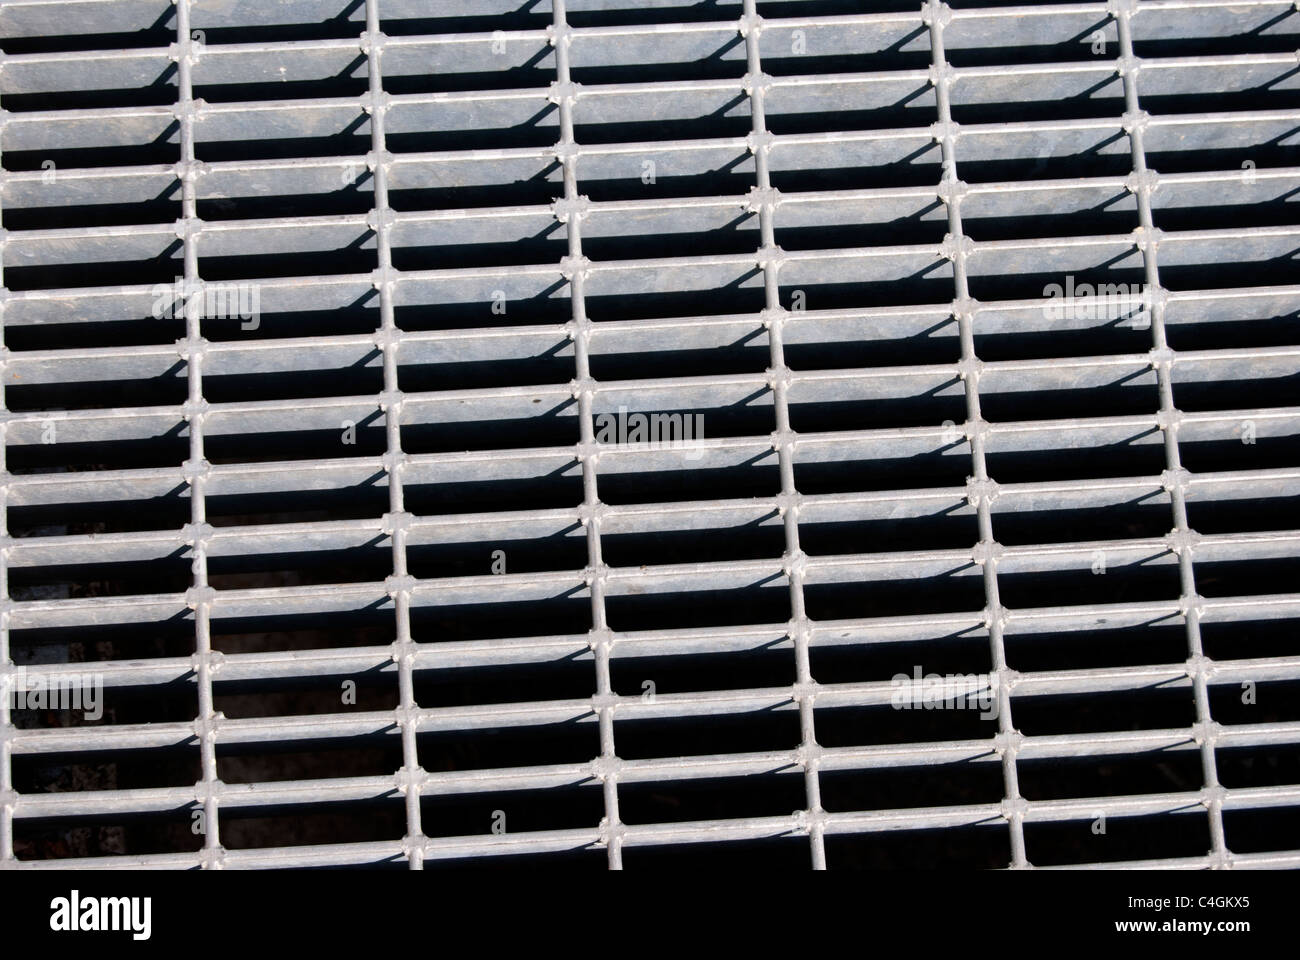 A close up of a Sewer grate Stock Photo - Alamy